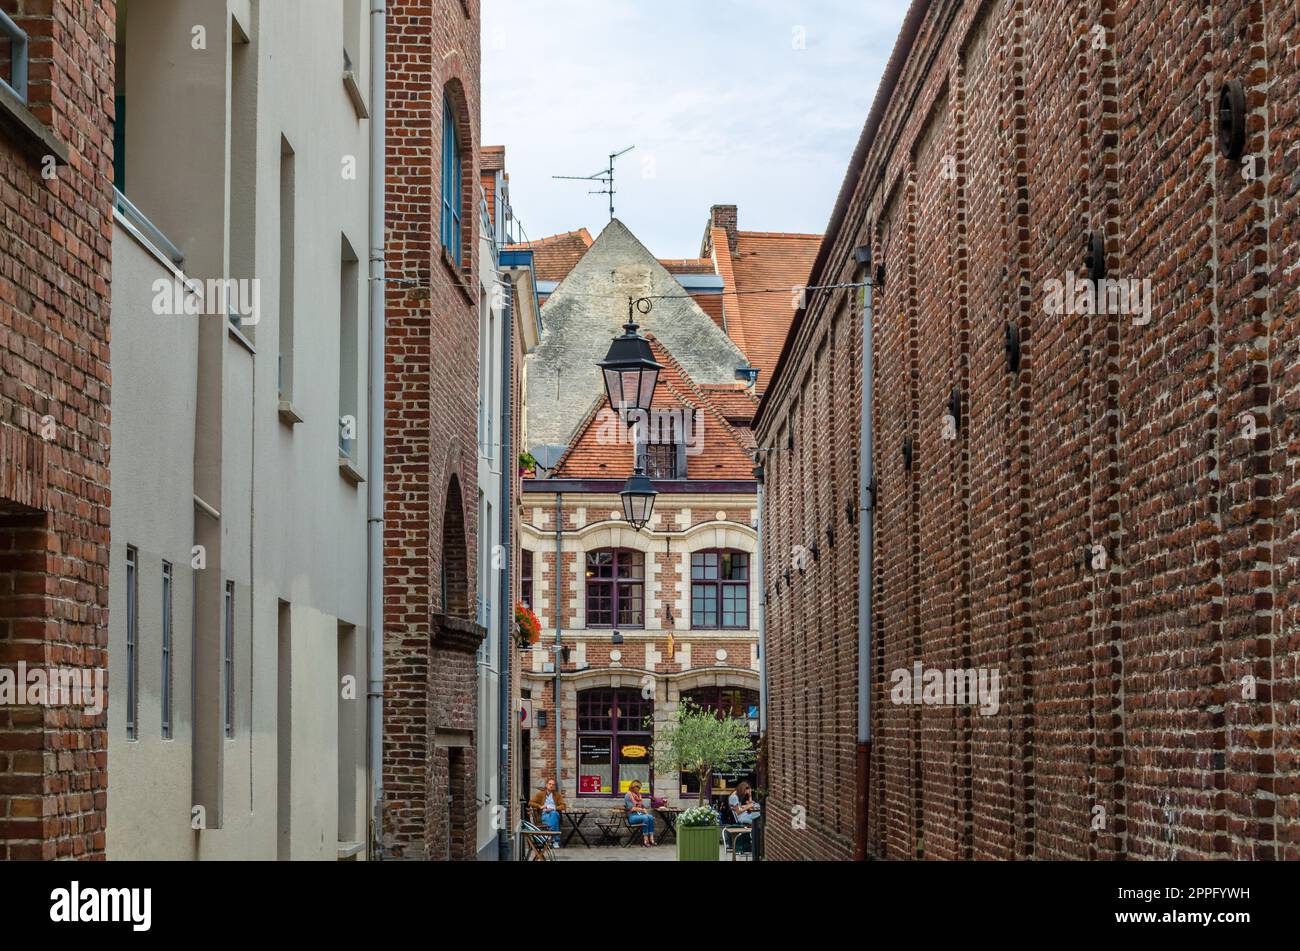 LILLE, FRANCE - AUGUST 17, 2013: Urban landscape, streets in the historic center of Lille, northern France Stock Photo